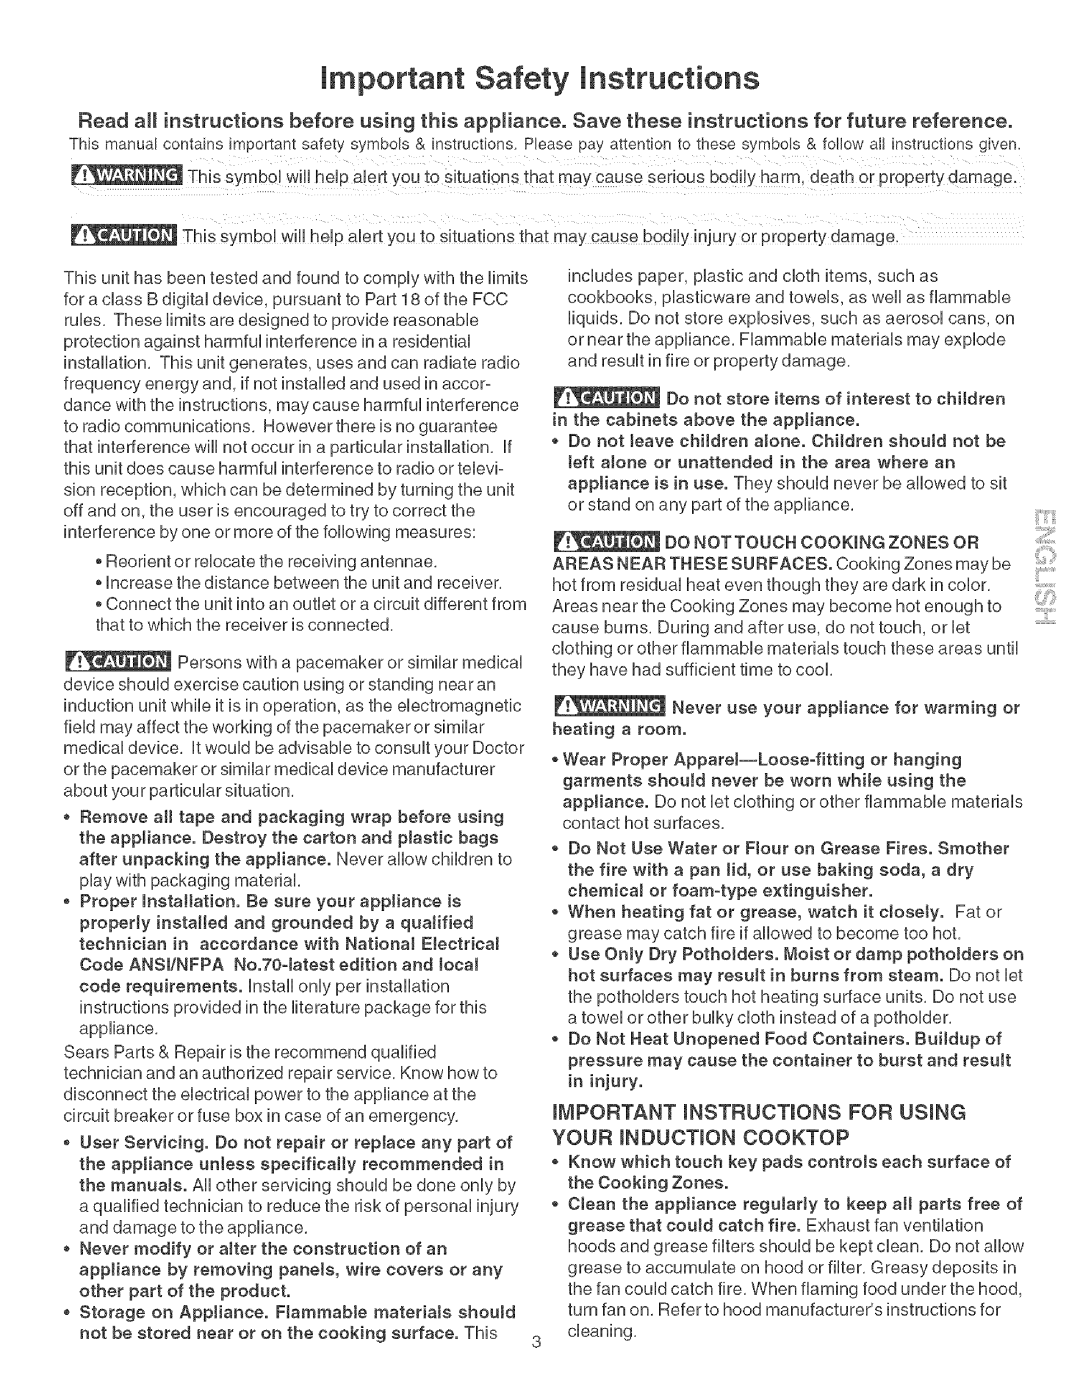 Kenmore 790.428 manual important Safety instructions, mMPORTANT mNSTRUOTmONS FOR USING, YOUR mNDUOTmON COOKTOP 